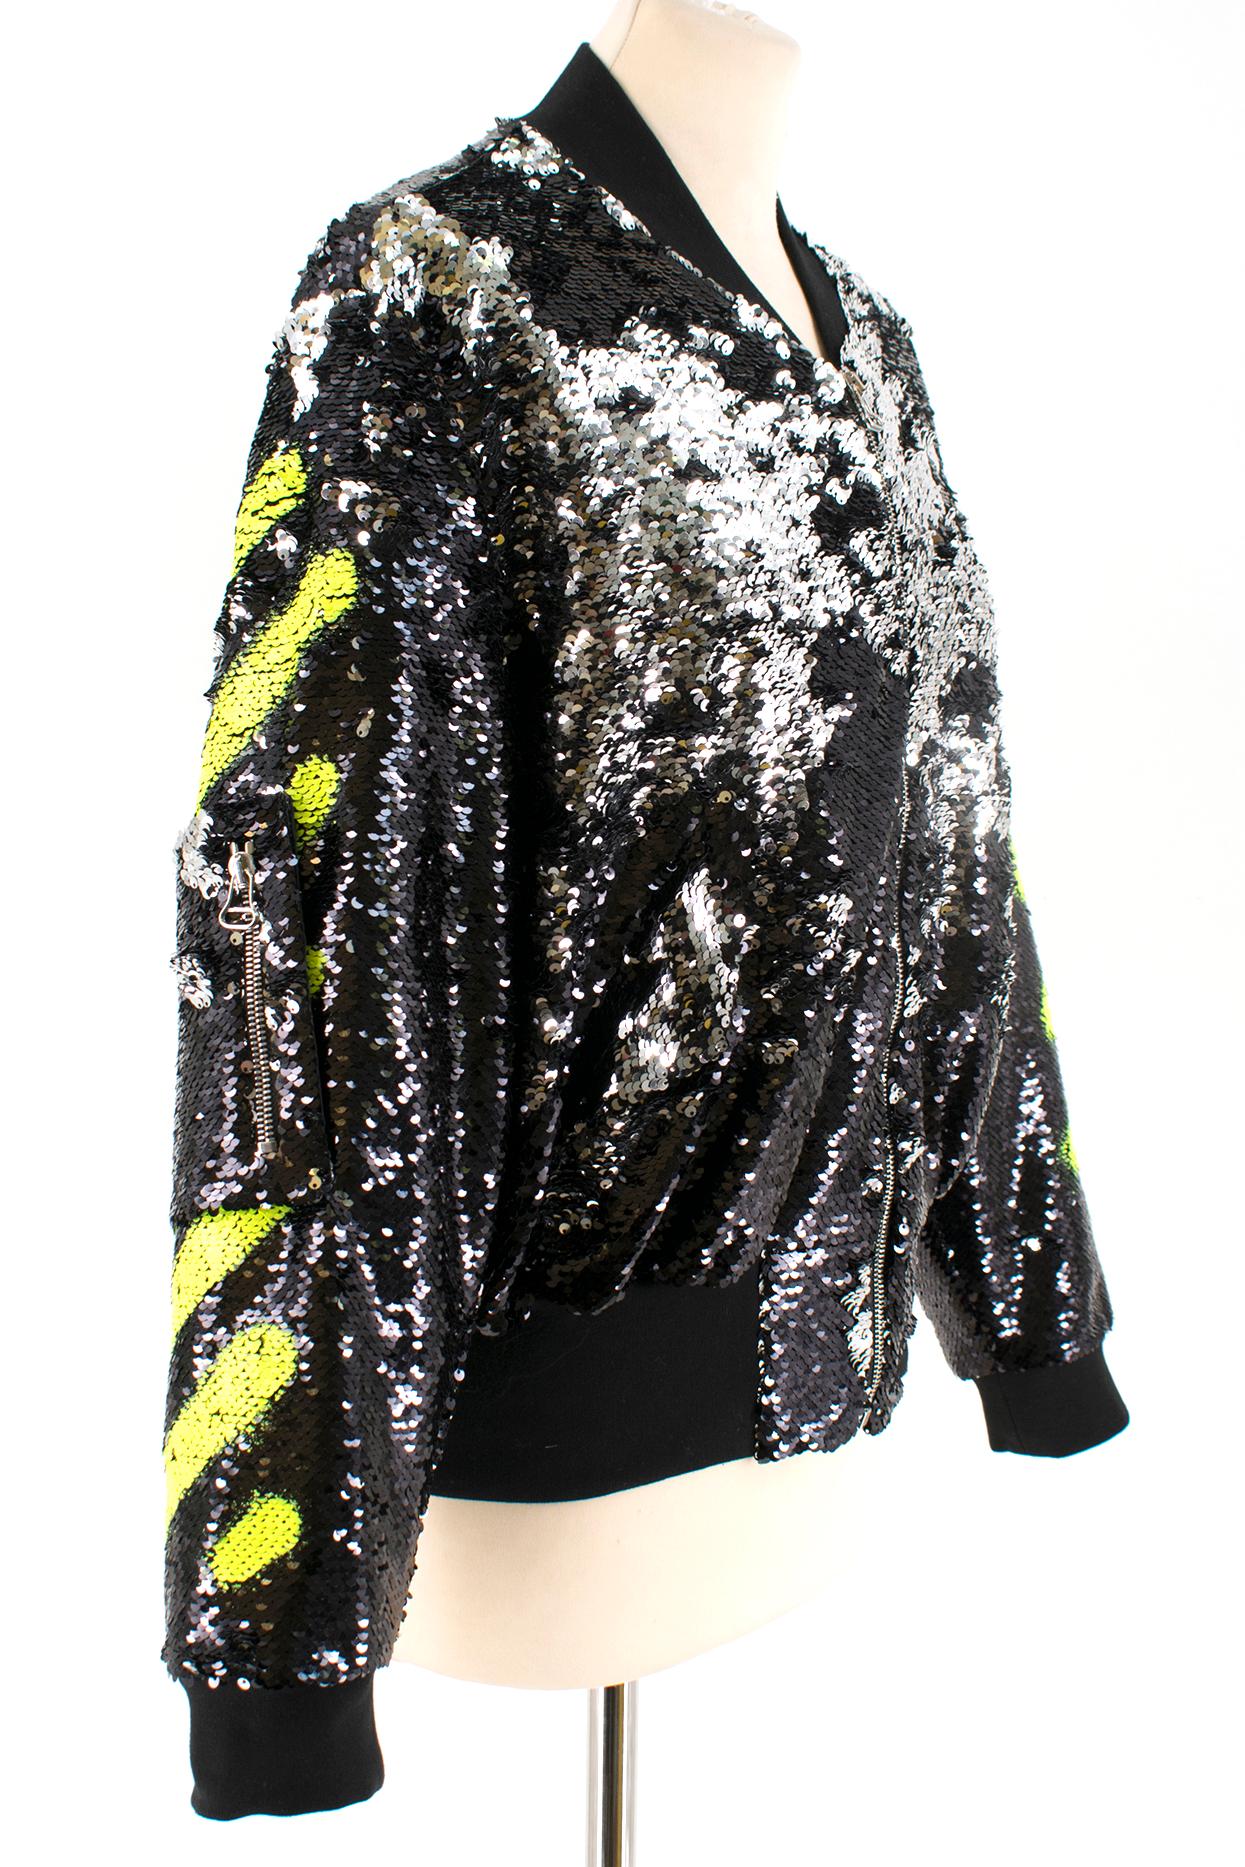 Off-White C/O Virgil Abloh Black Sequin Bomber Jacket

Sequin jacket 
Logo design in painted neon green sequins 
Double sided sequins black/silver
Ribbed black hems, sleeve cuffs and neck line
exterior pockets on either side of jacket with snap